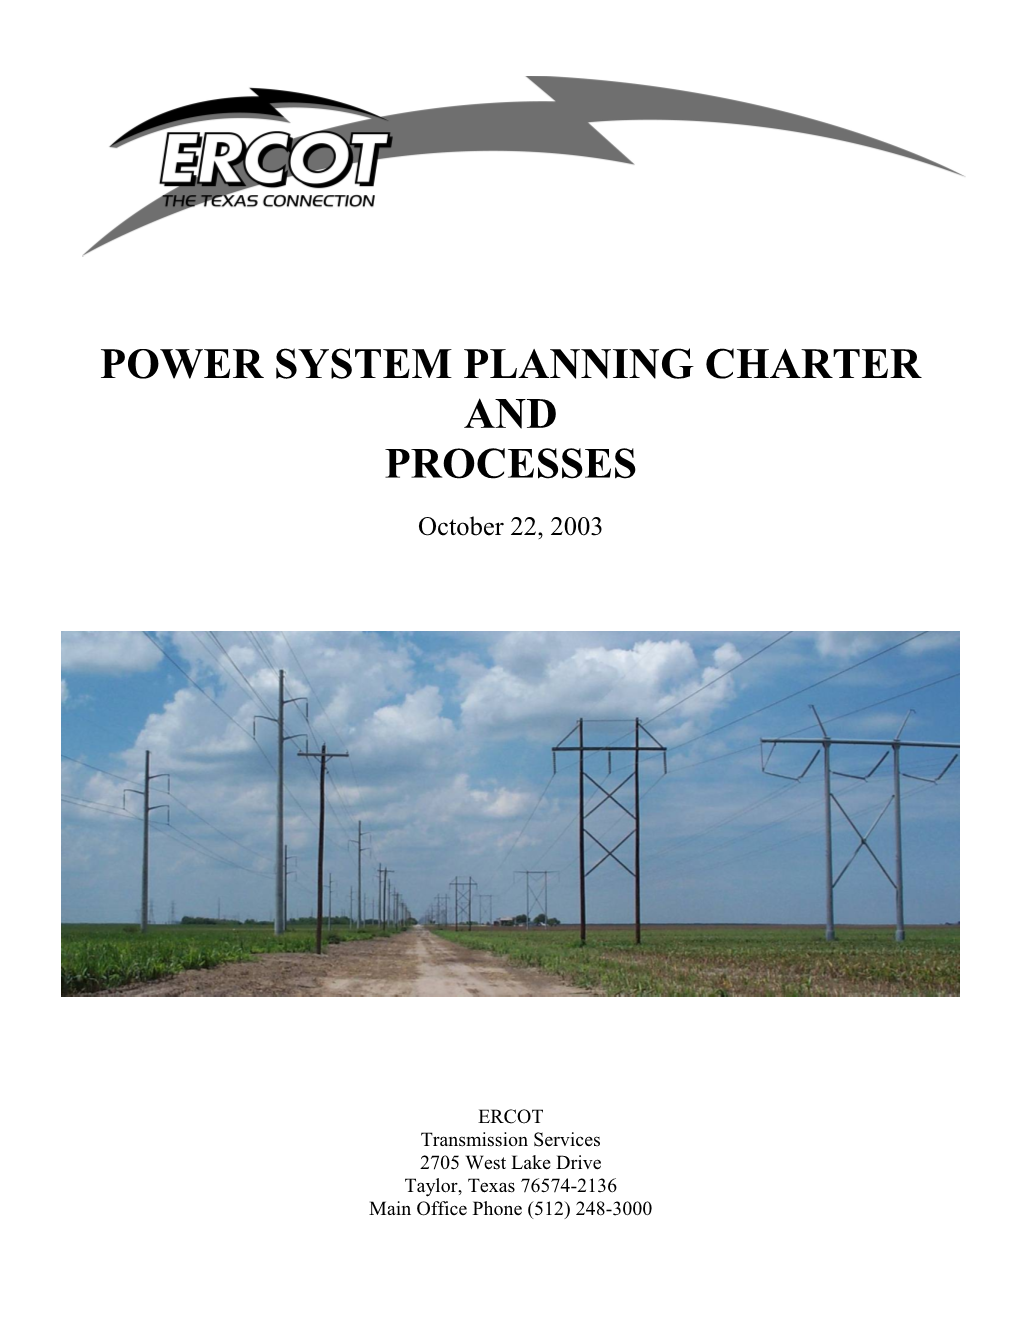 Ercot Power System Planning Charter and Processes10/22/2003